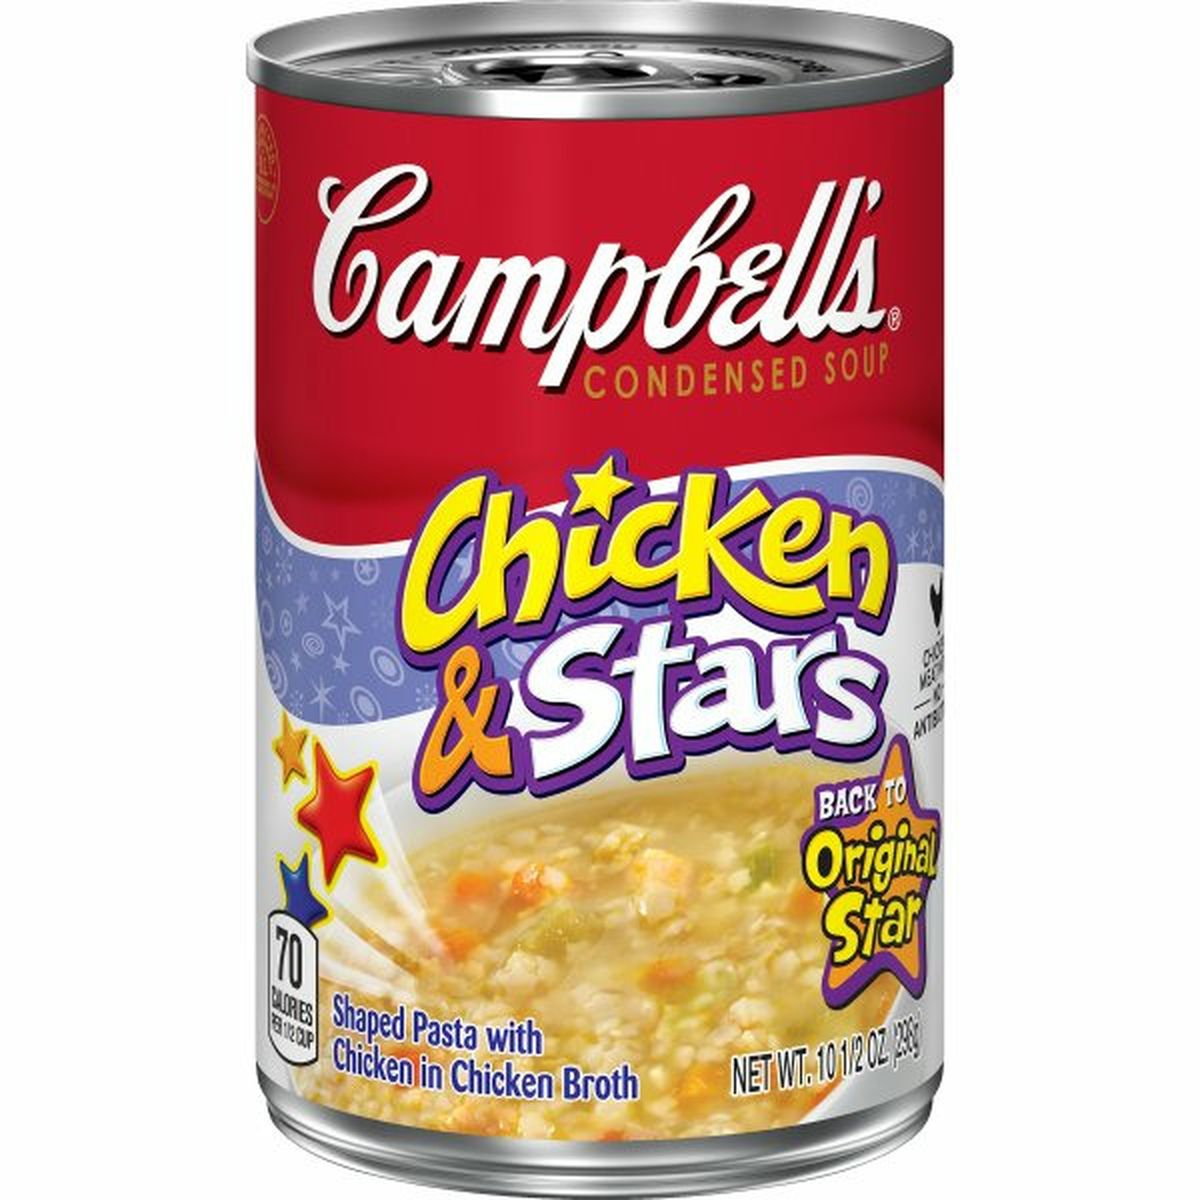 Calories in Campbell's Condensed Chicken & Stars Soup